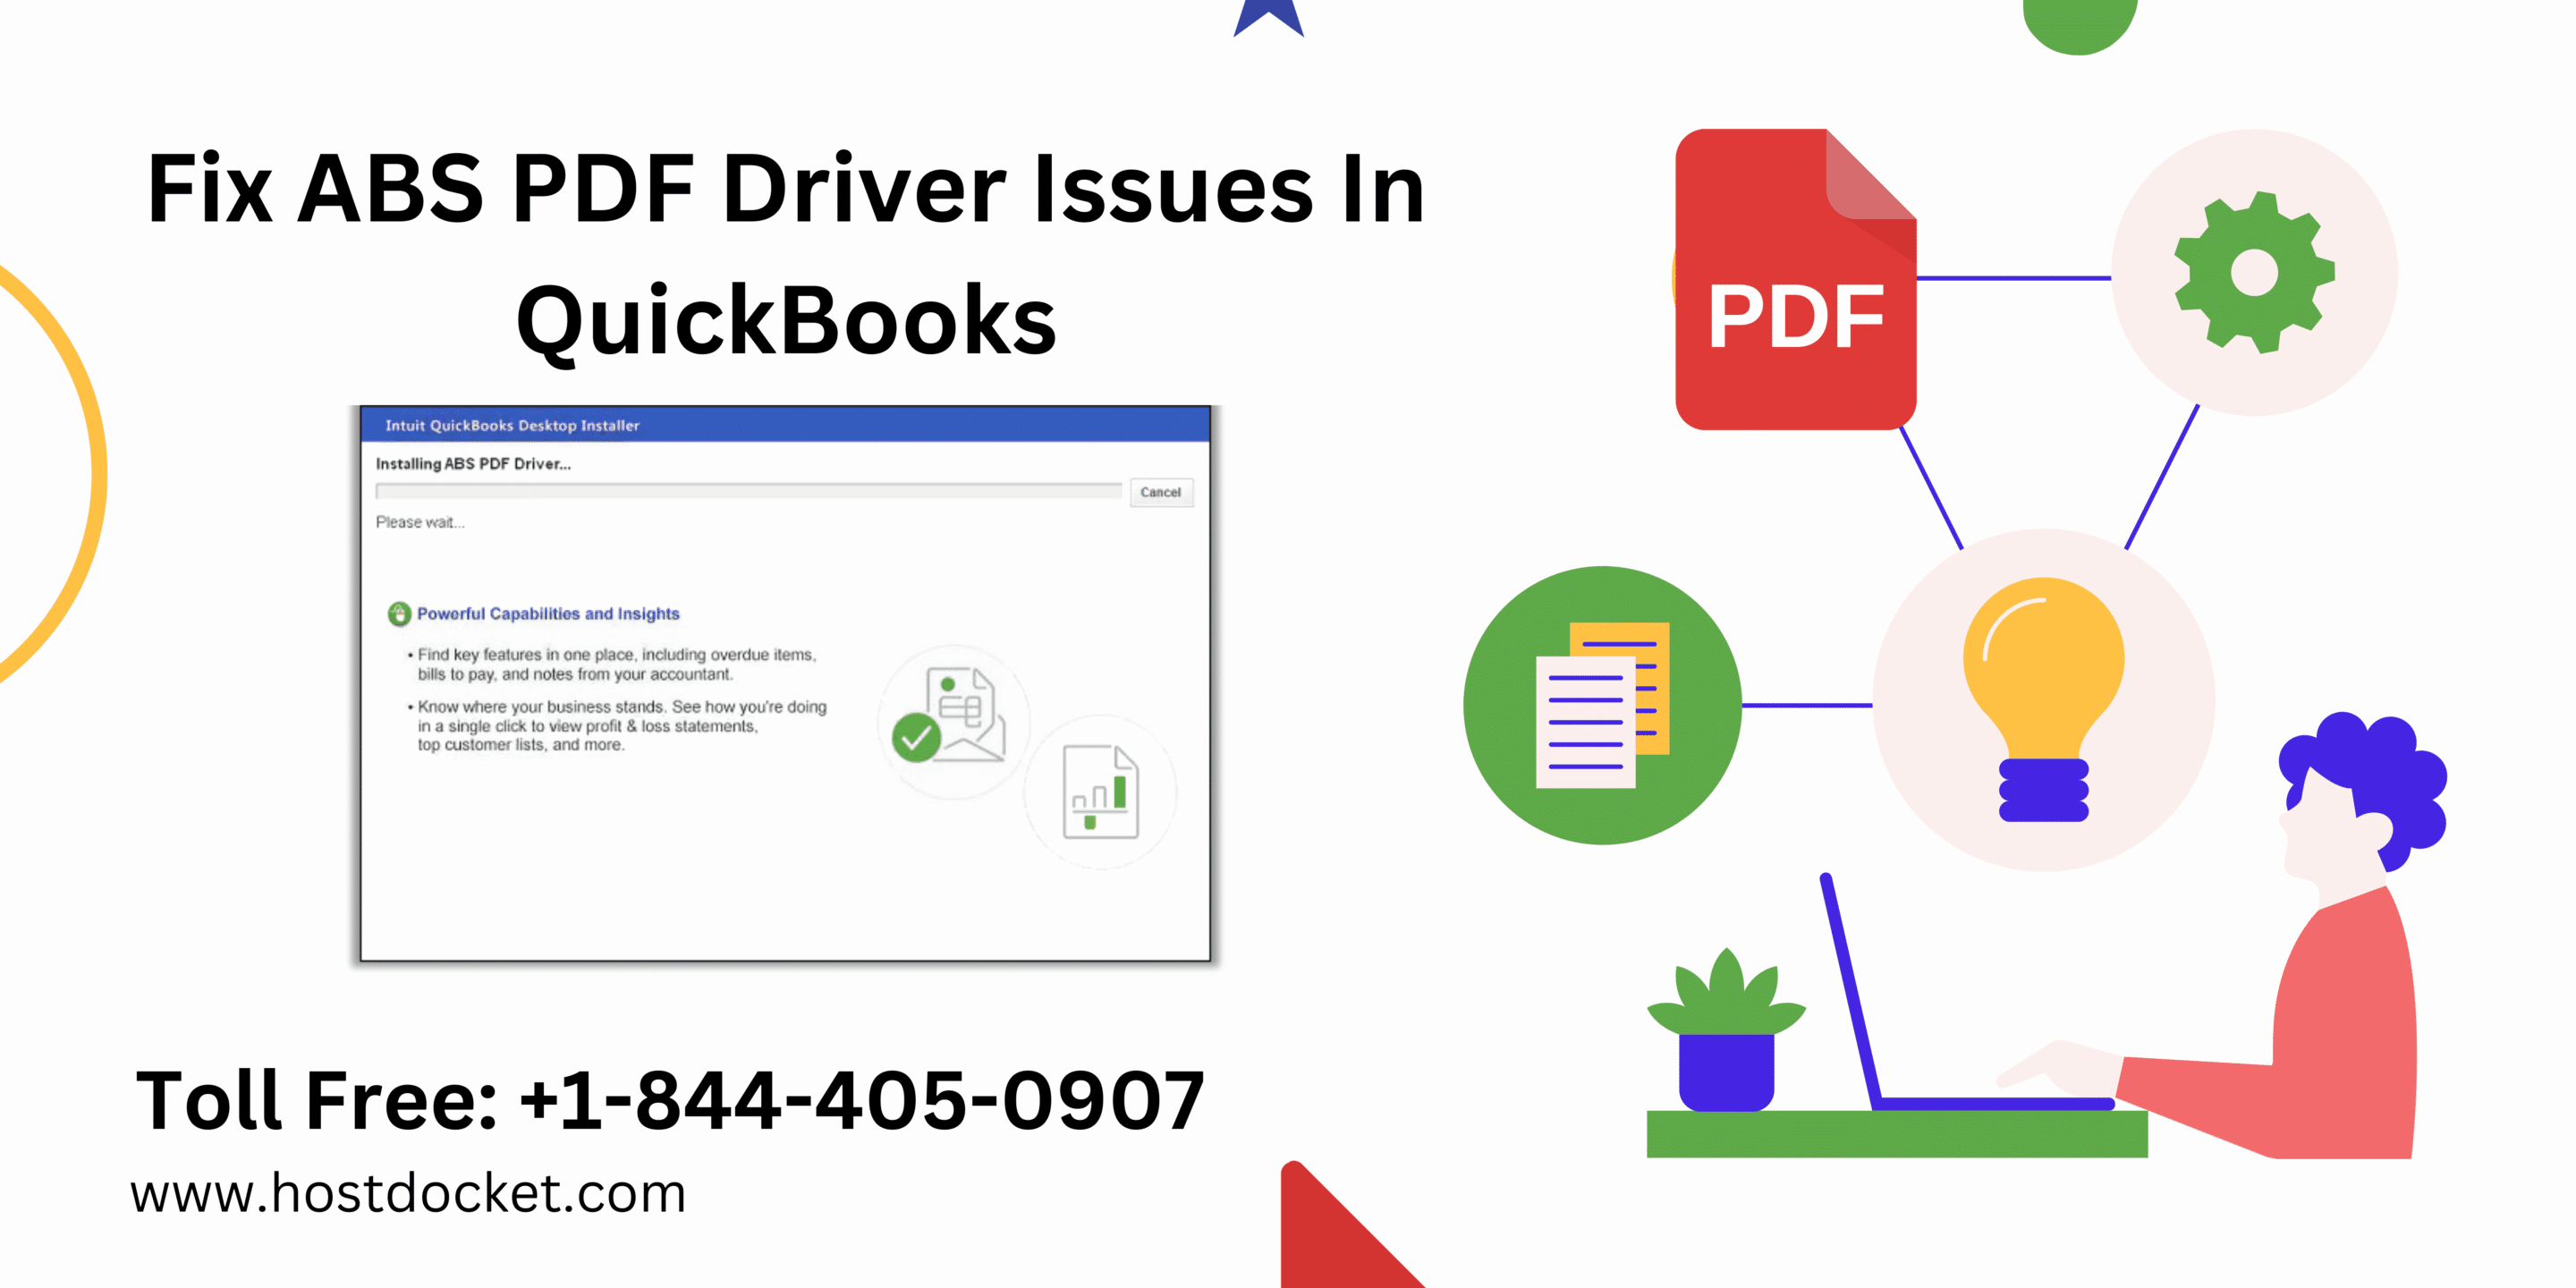 QuickBooks Installation Stops while Installing ABS PDF Driver [FIX]